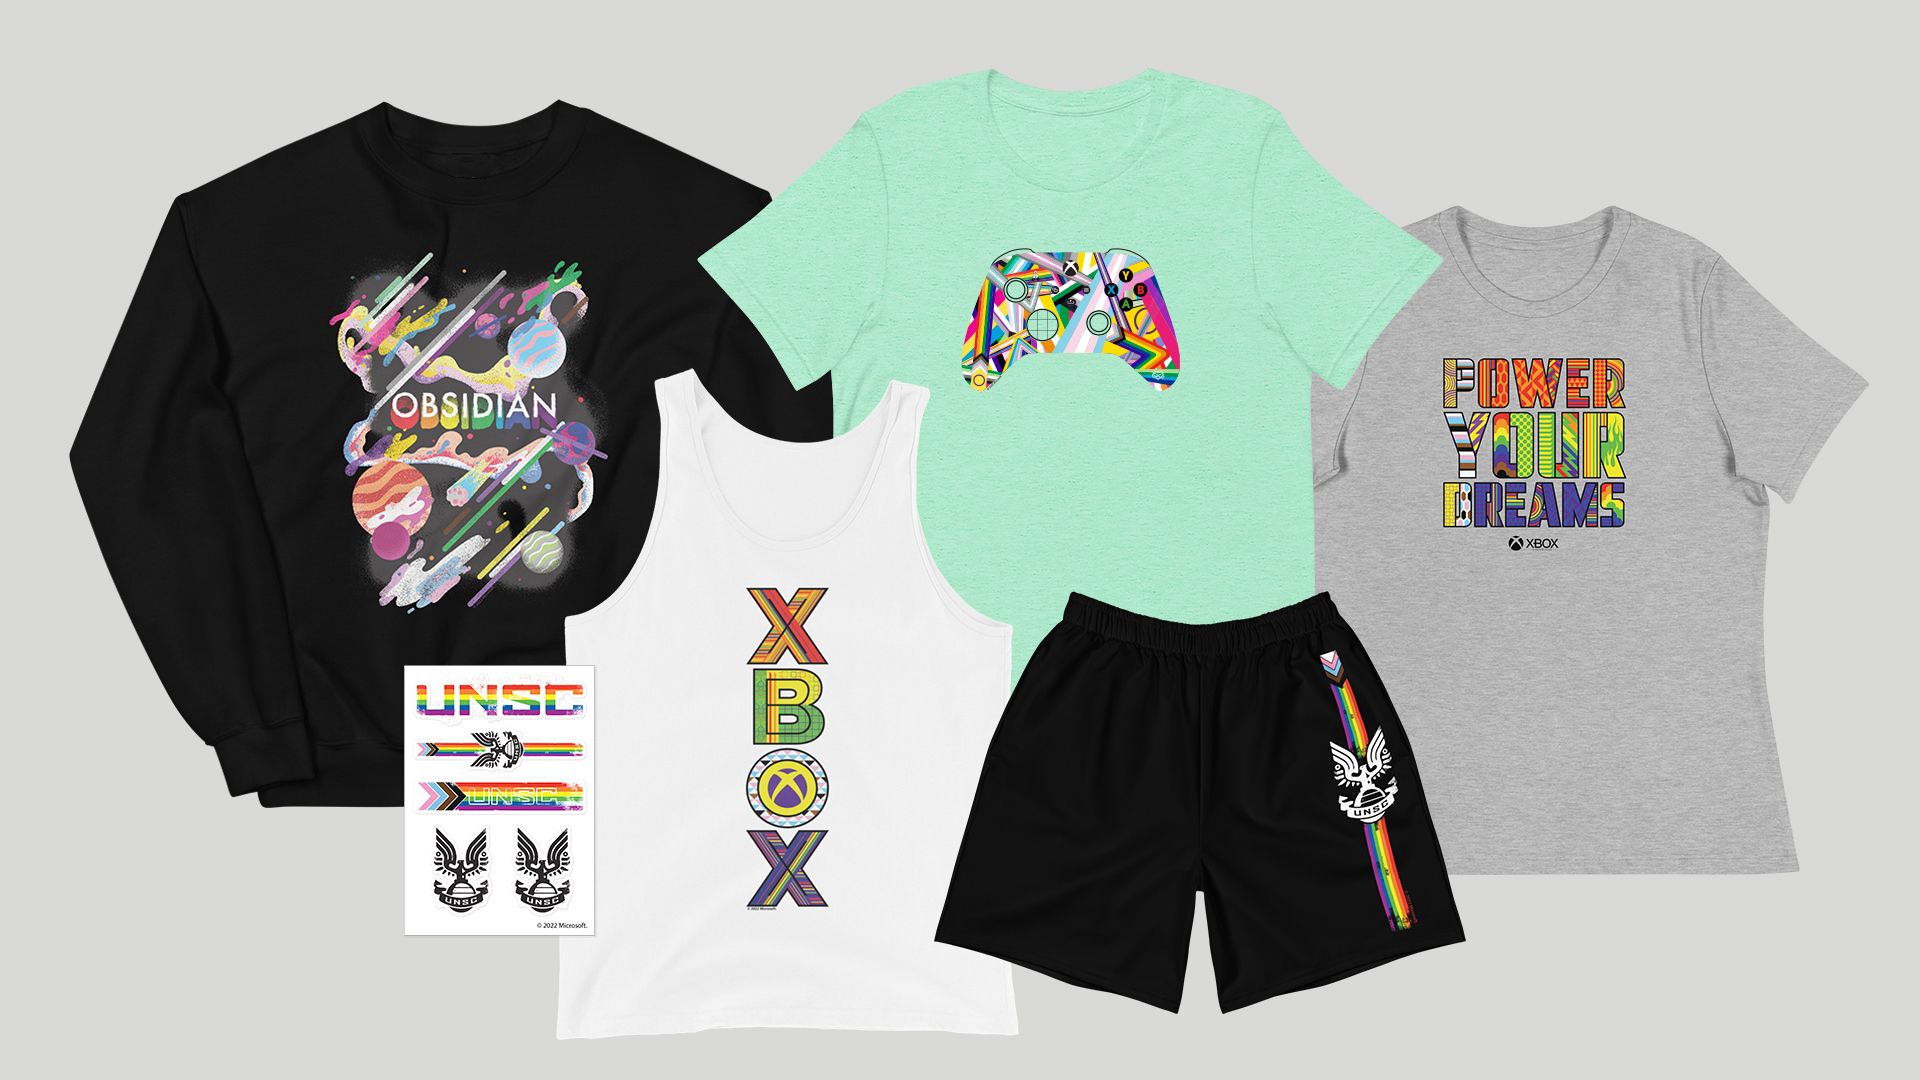 Xbox Gear shop product image featuring t shirts, sweatshirt, shorts and tank top with colorful Pride theme graphics.